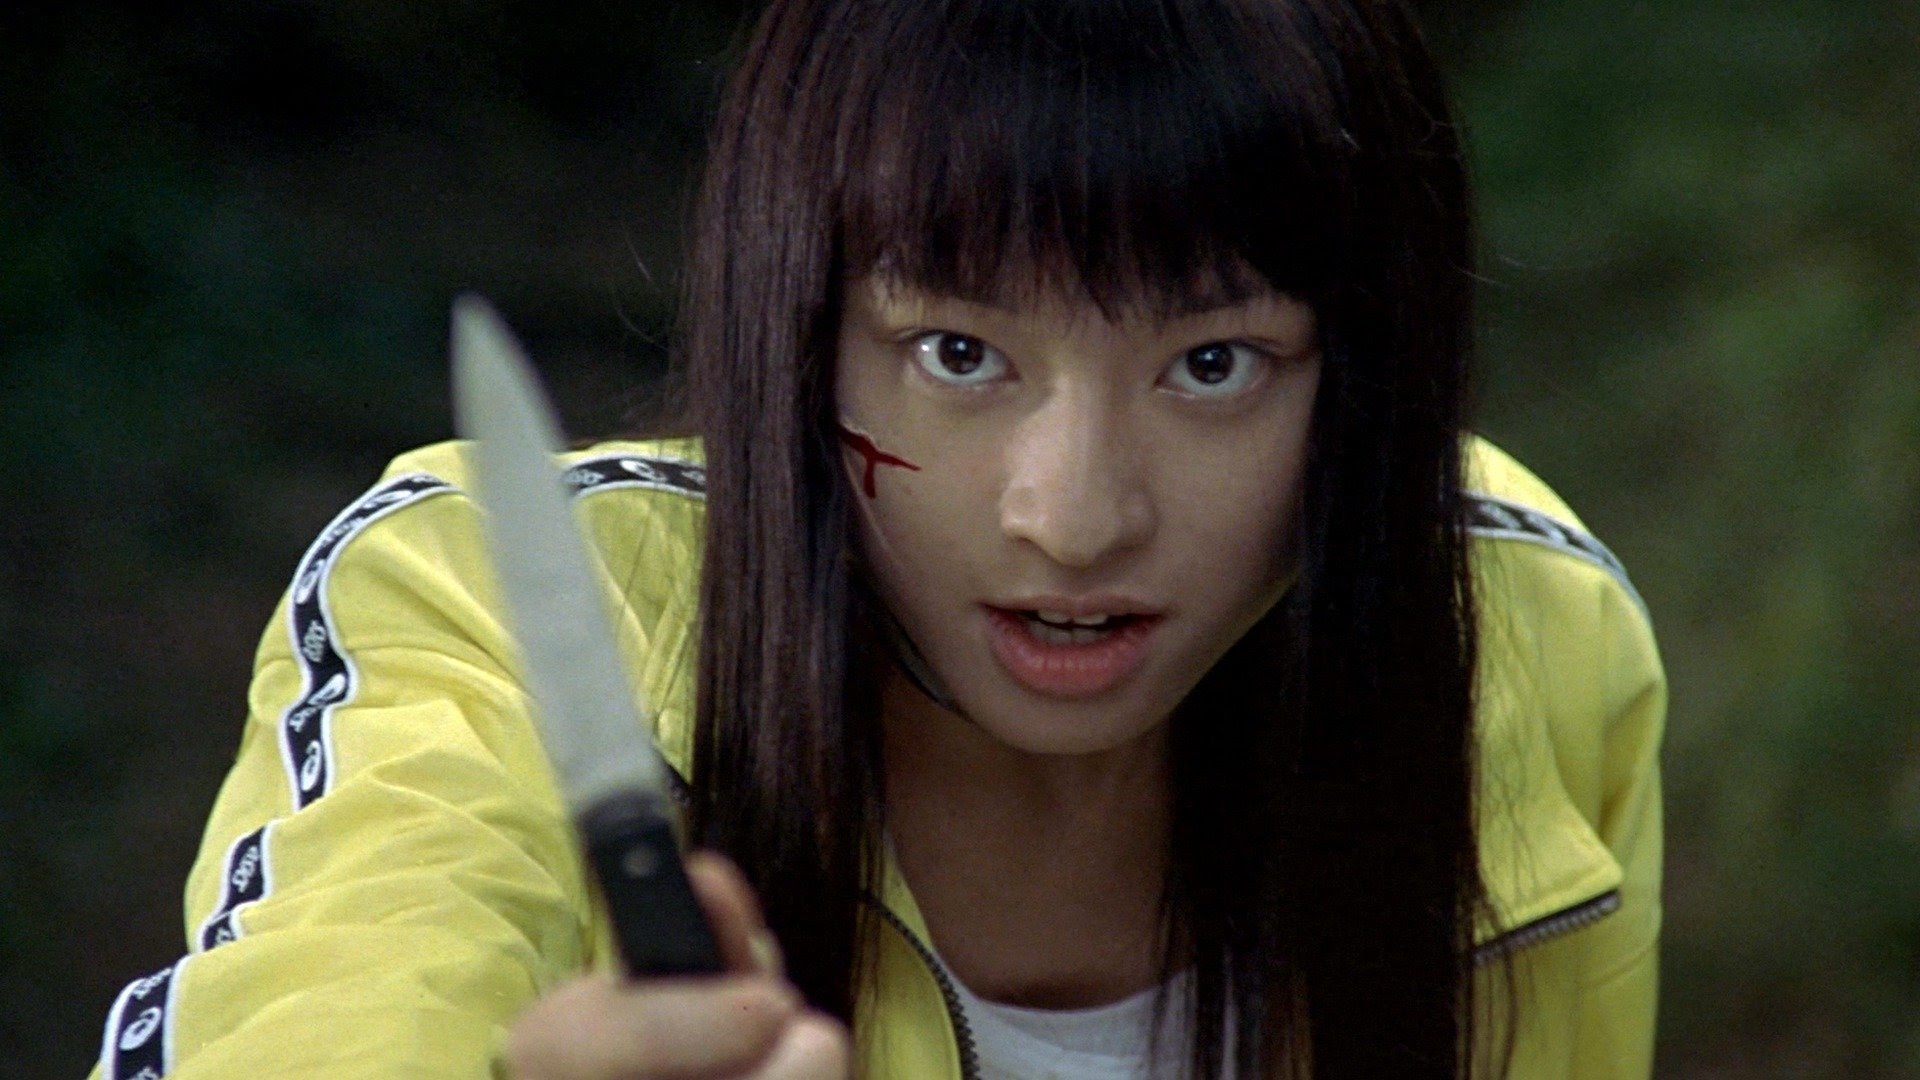 Battle Royale - Movies on Google Play